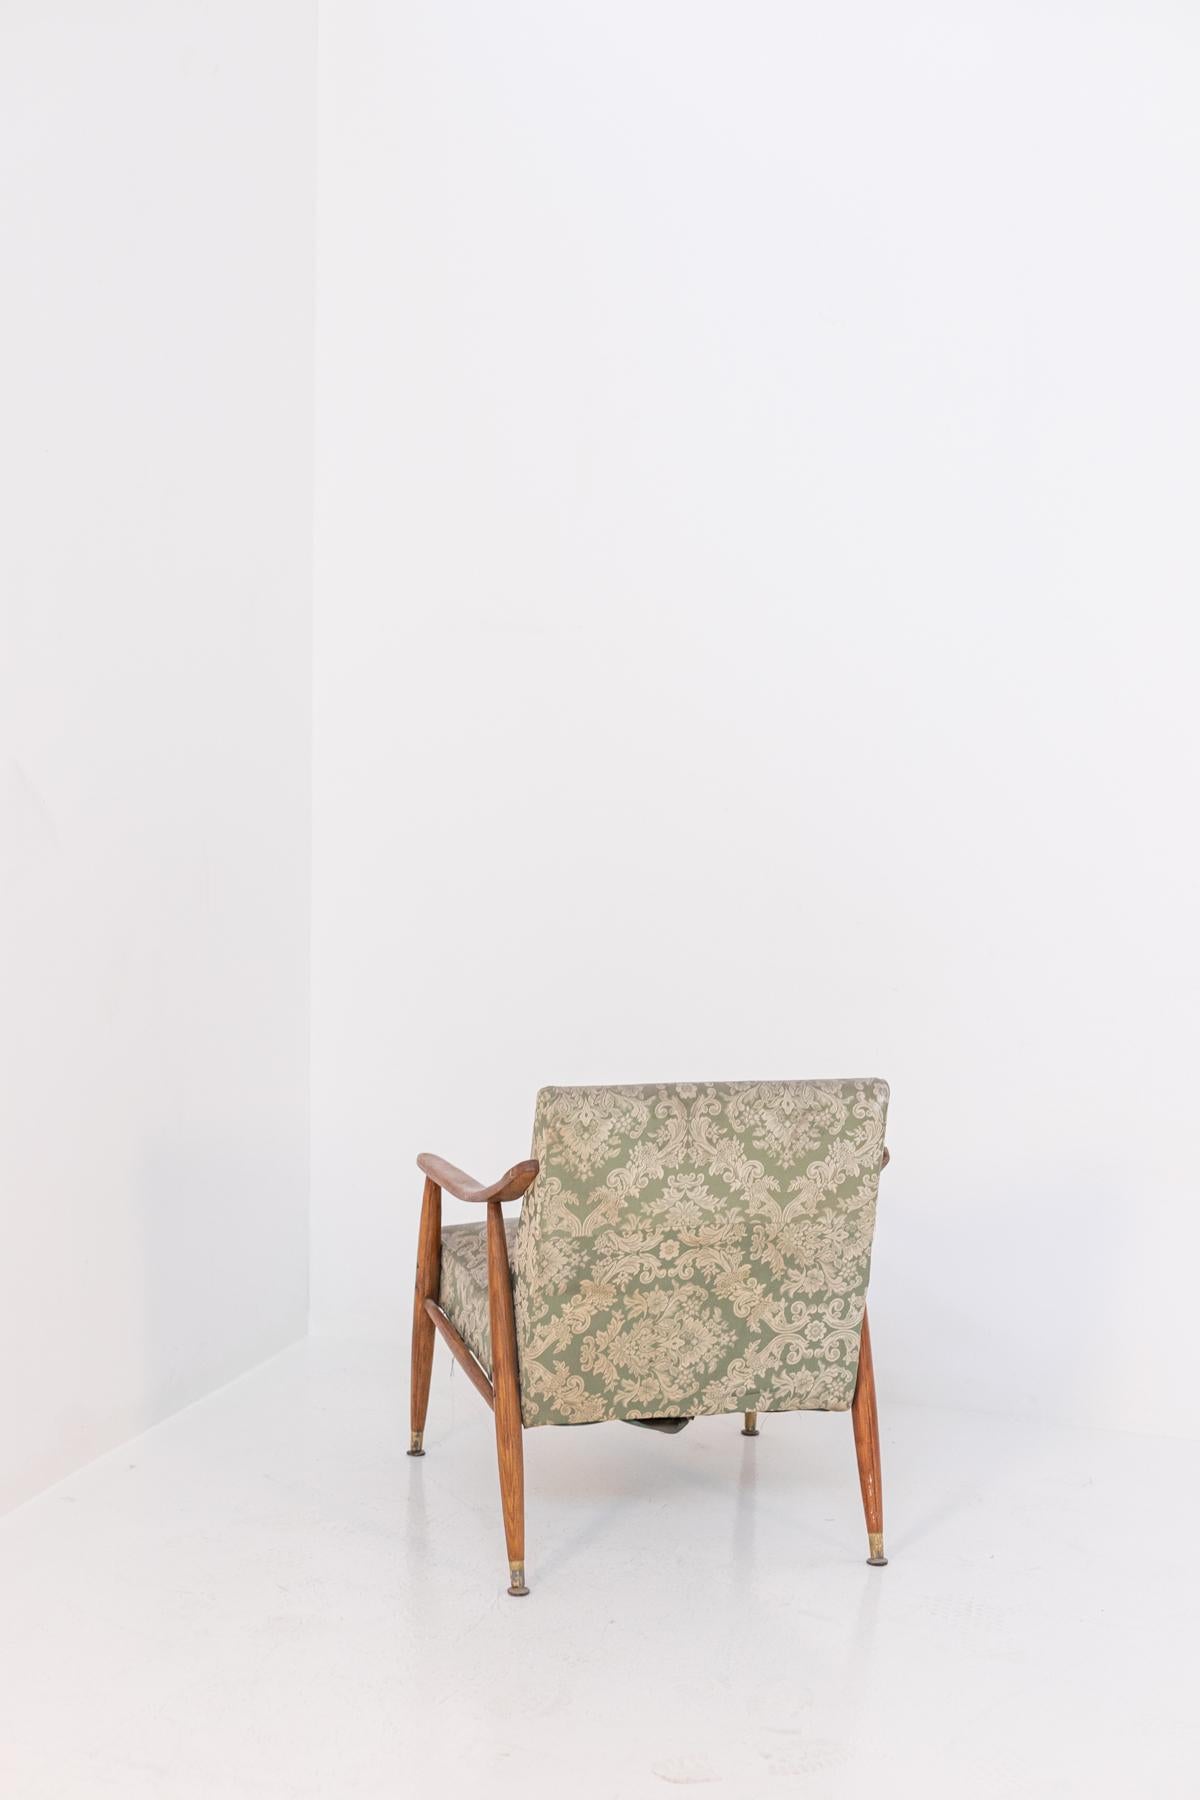 Nordic Armchair in Wood and Damask Fabric For Sale 7